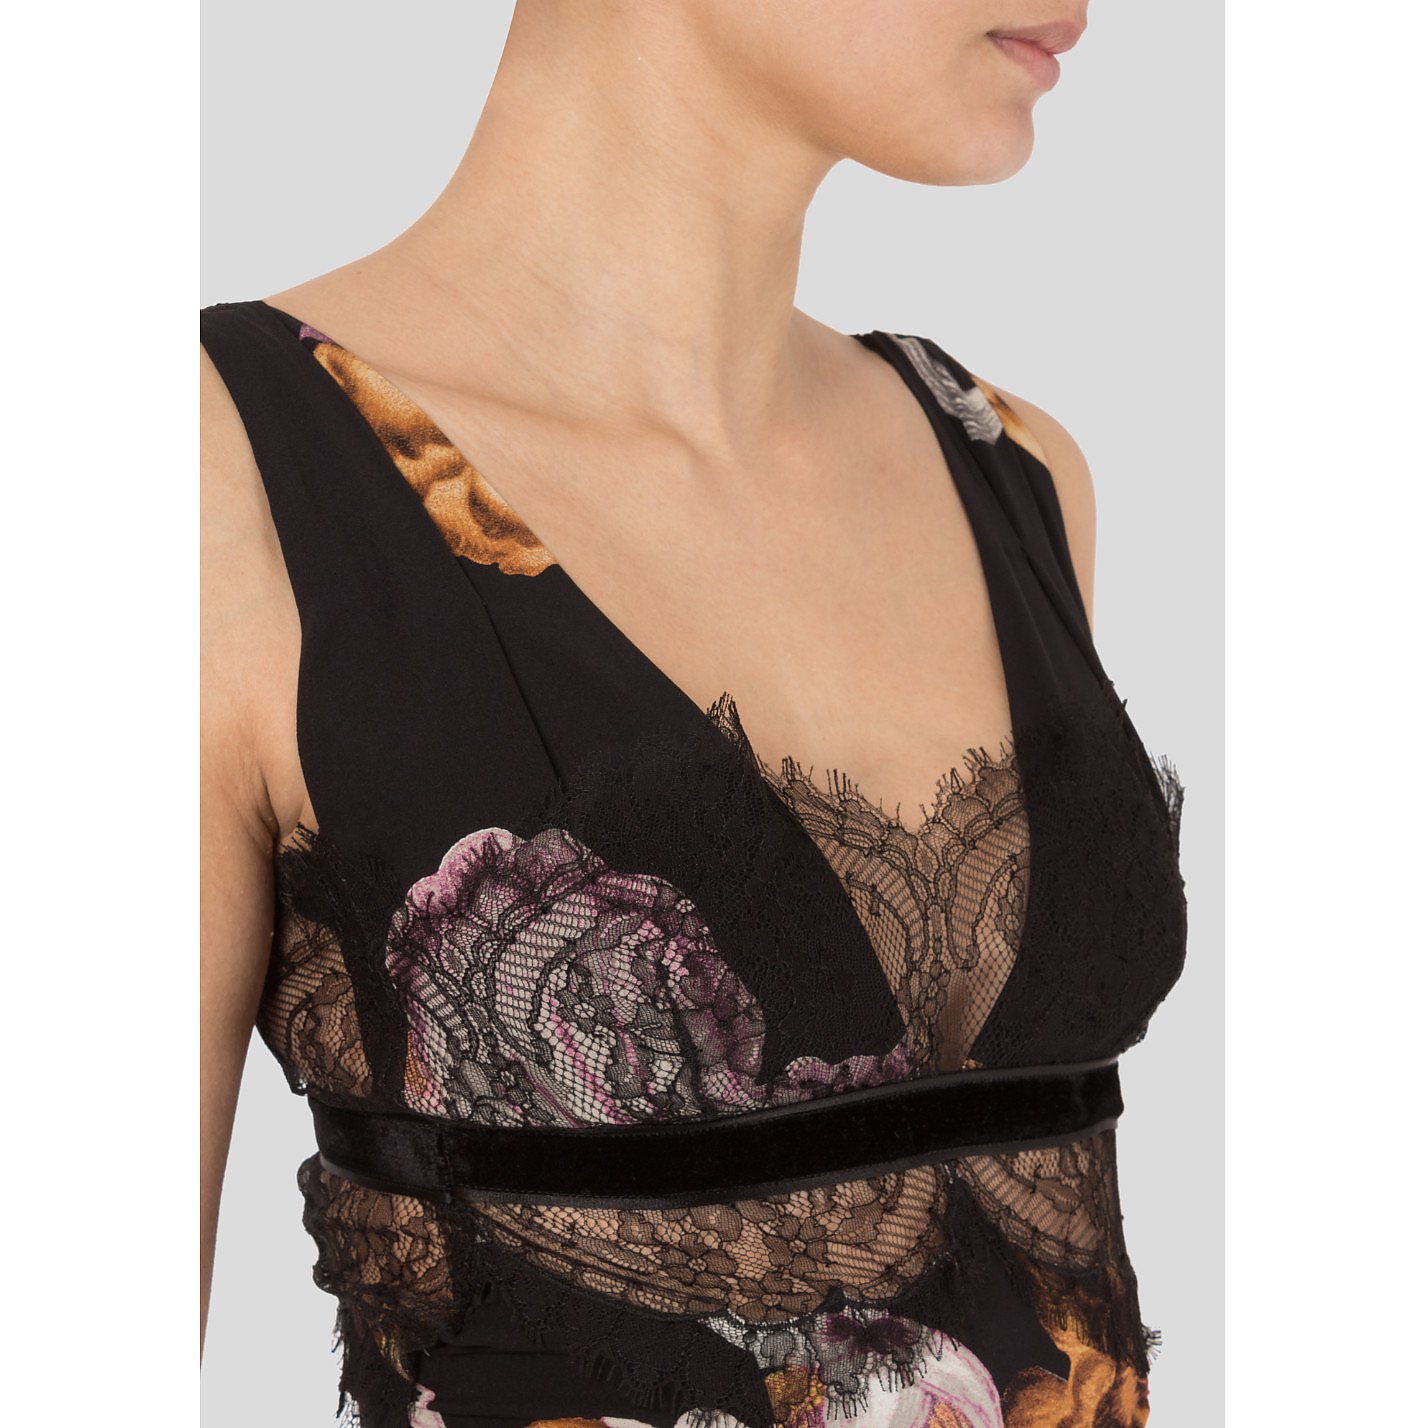 Roberto Cavalli Floral Lace-Trimmed Dress